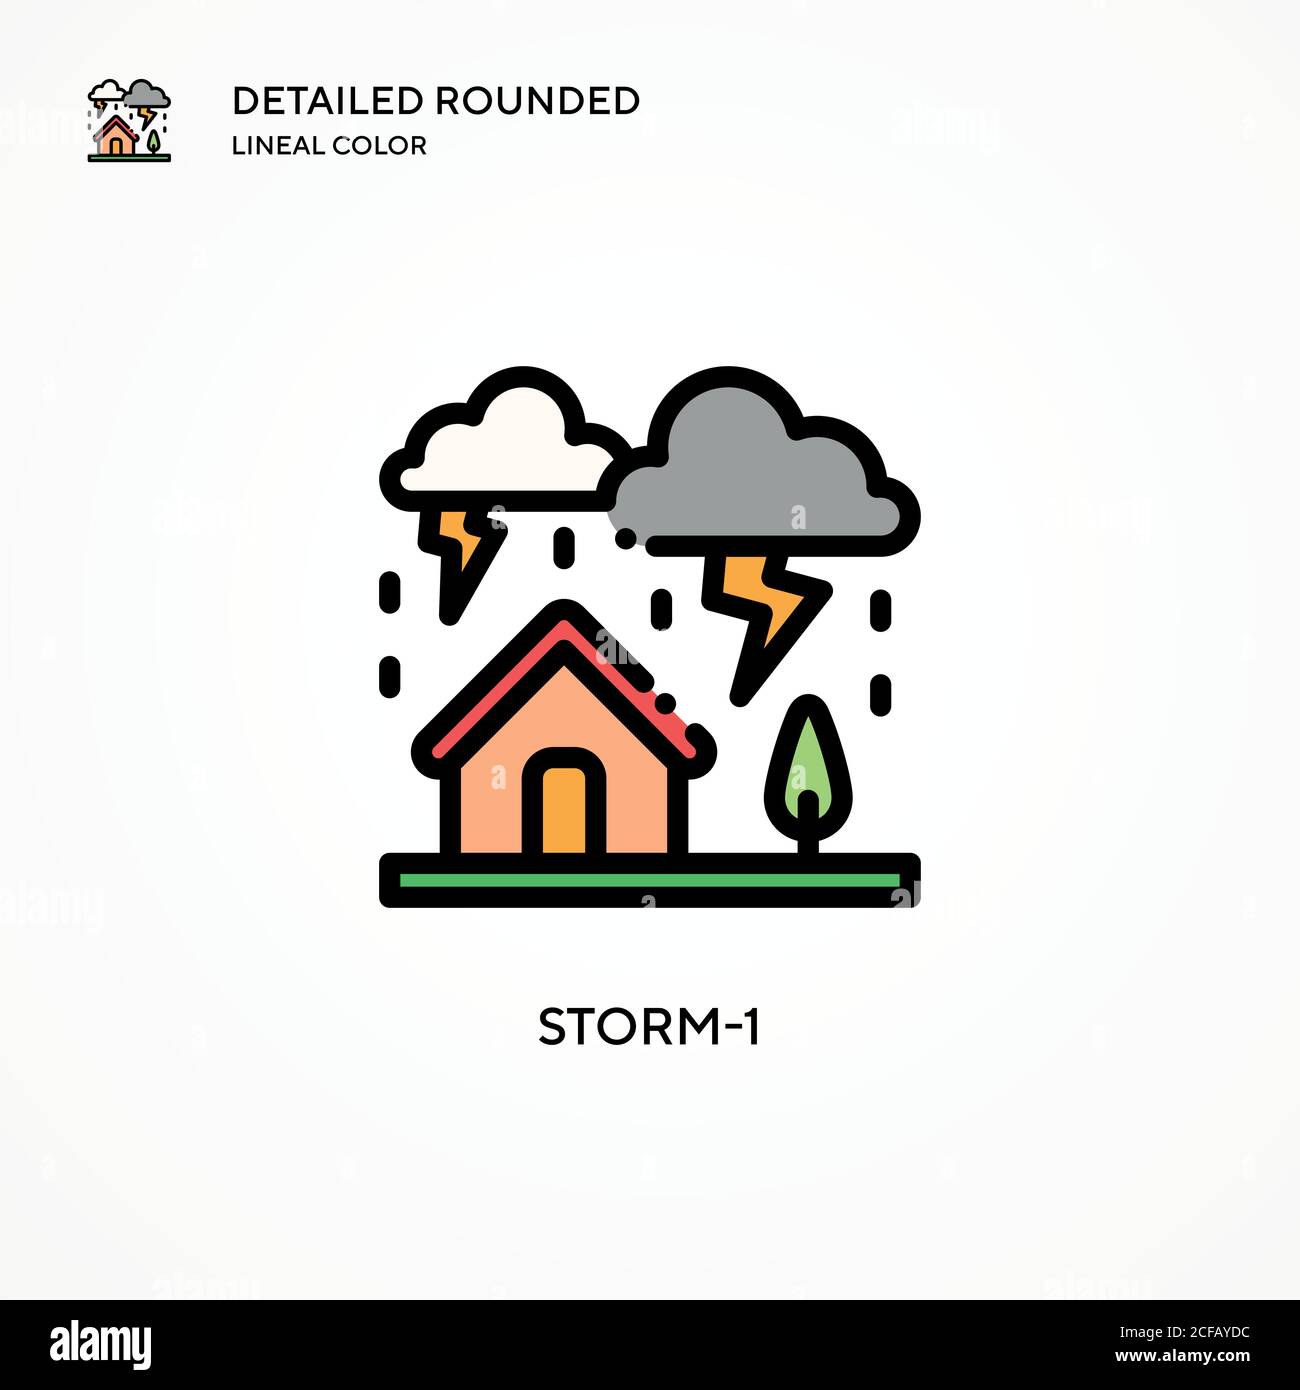 Storm-1 vector icon. Modern vector illustration concepts. Easy to edit and customize. Stock Vector